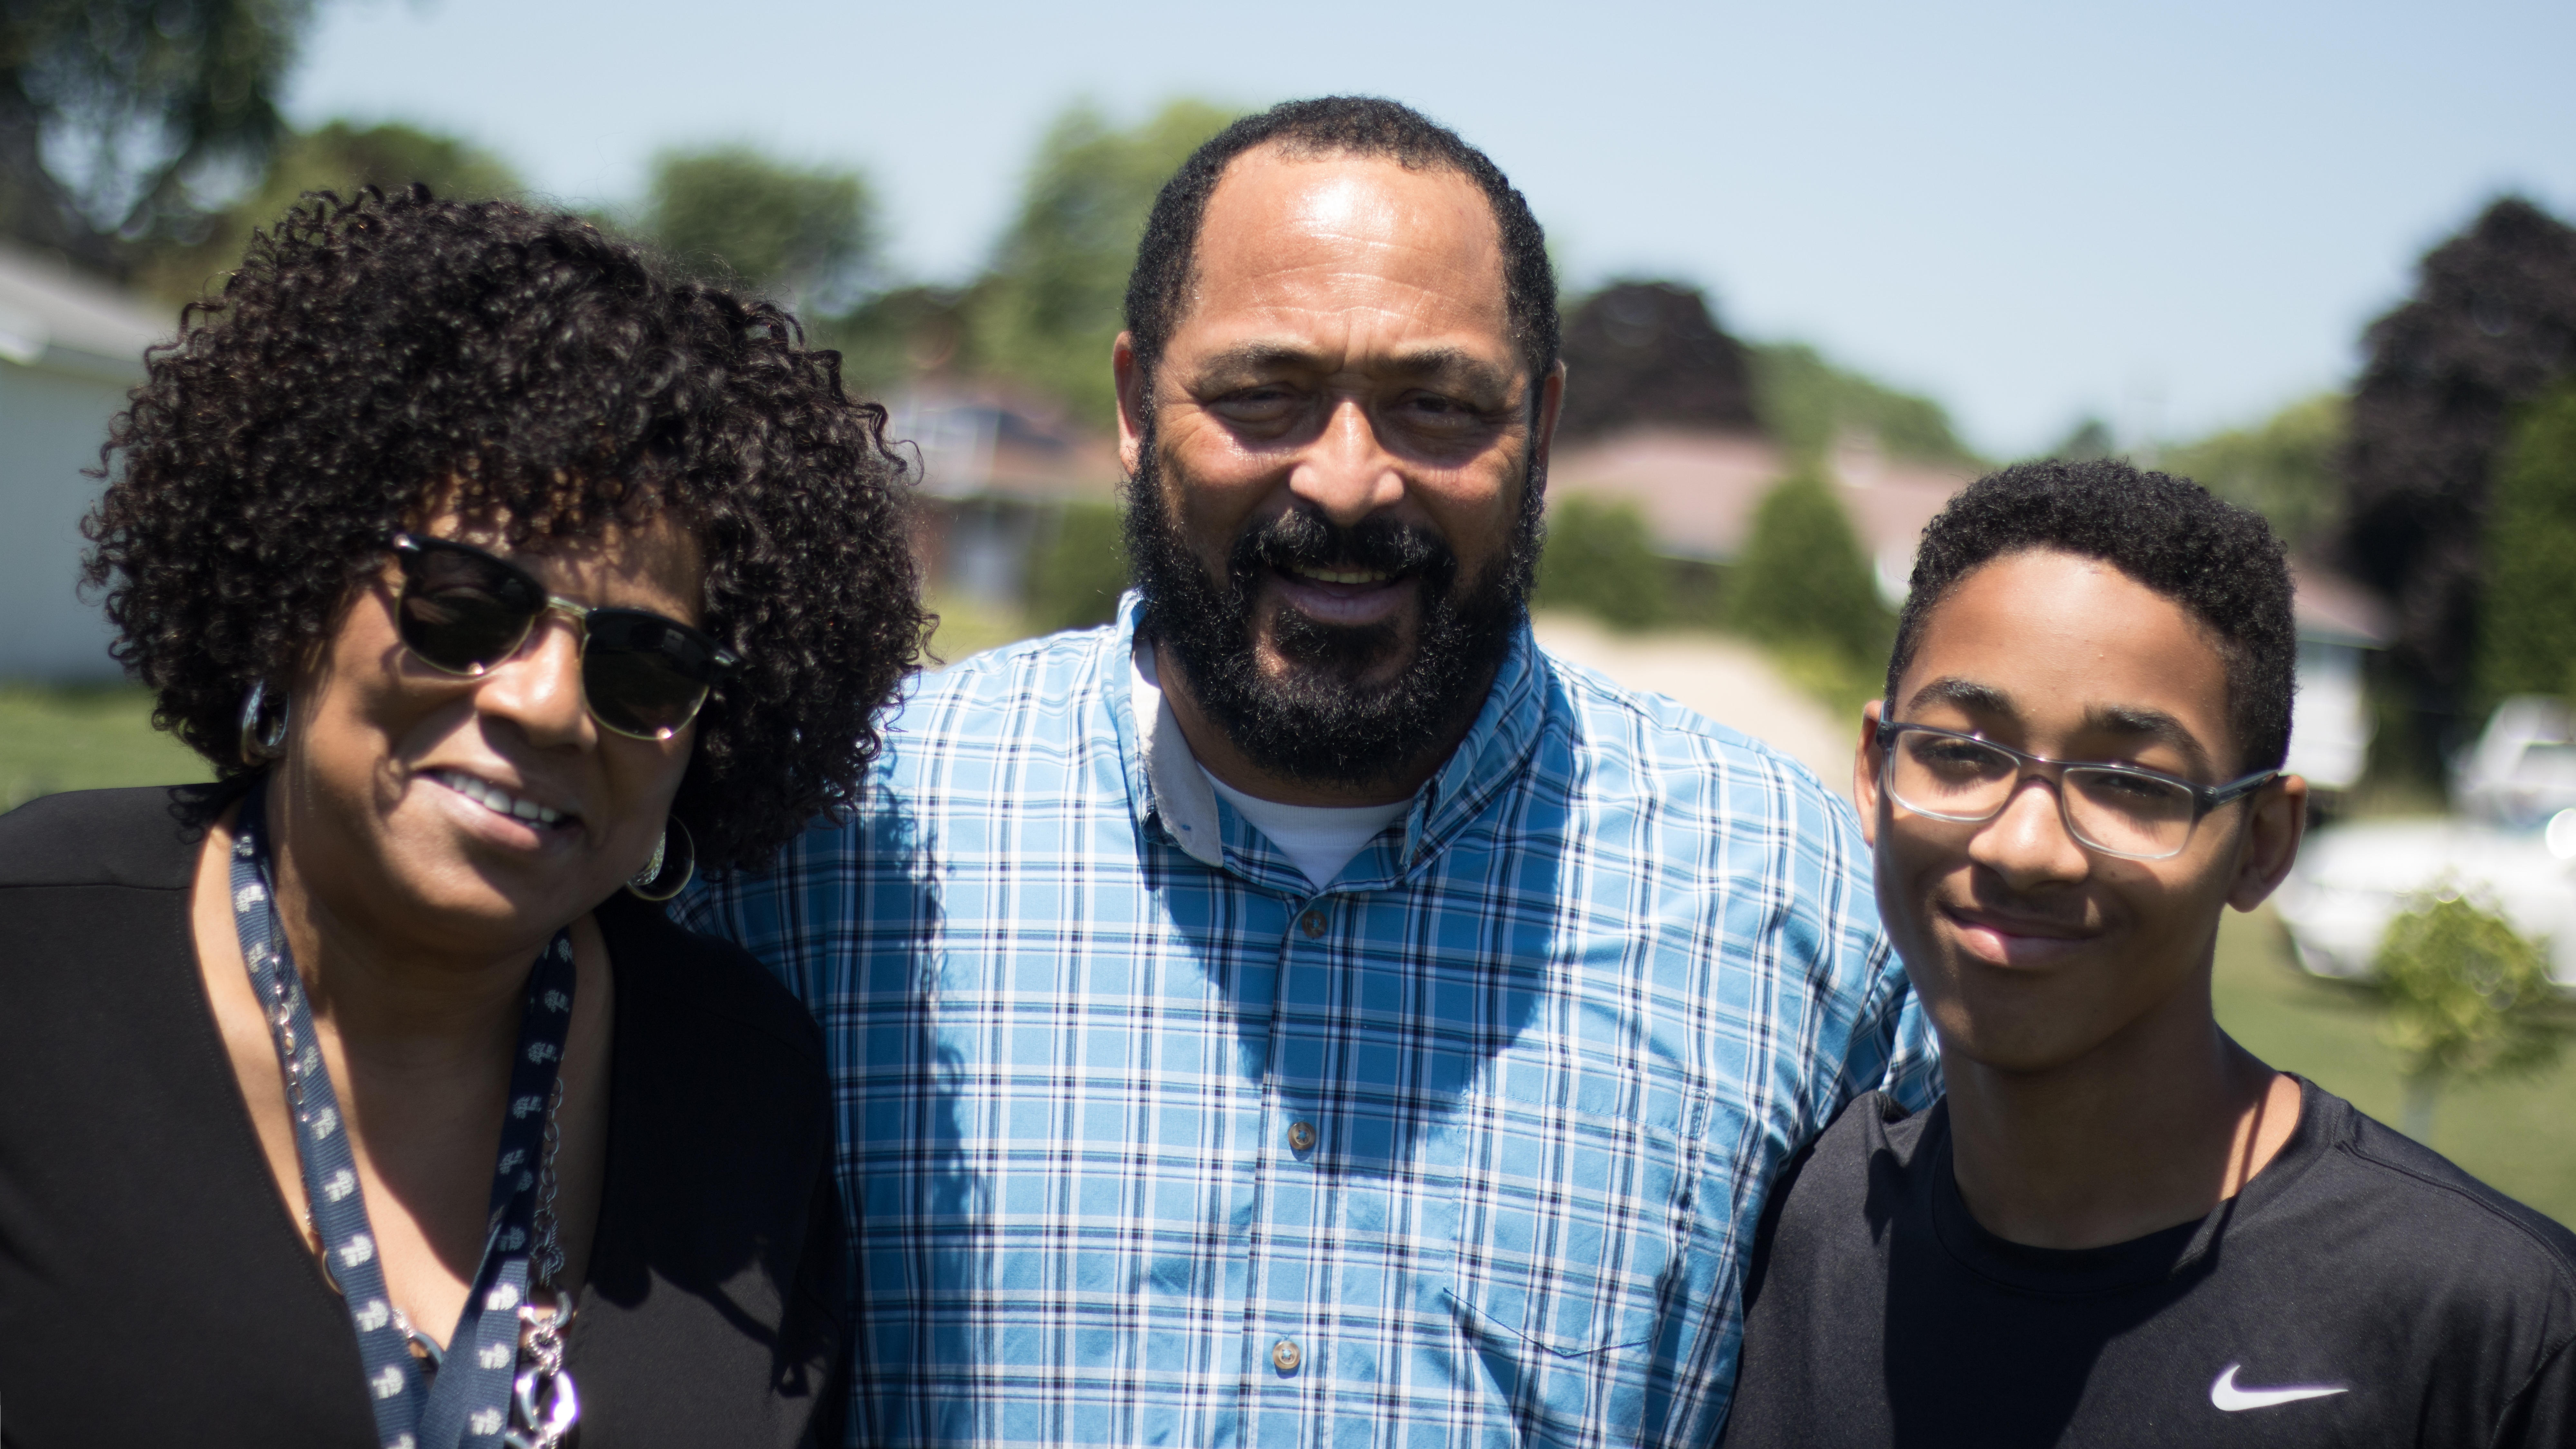 Community engagement coordinator posing for a photo with a father and son at an outdoor event.